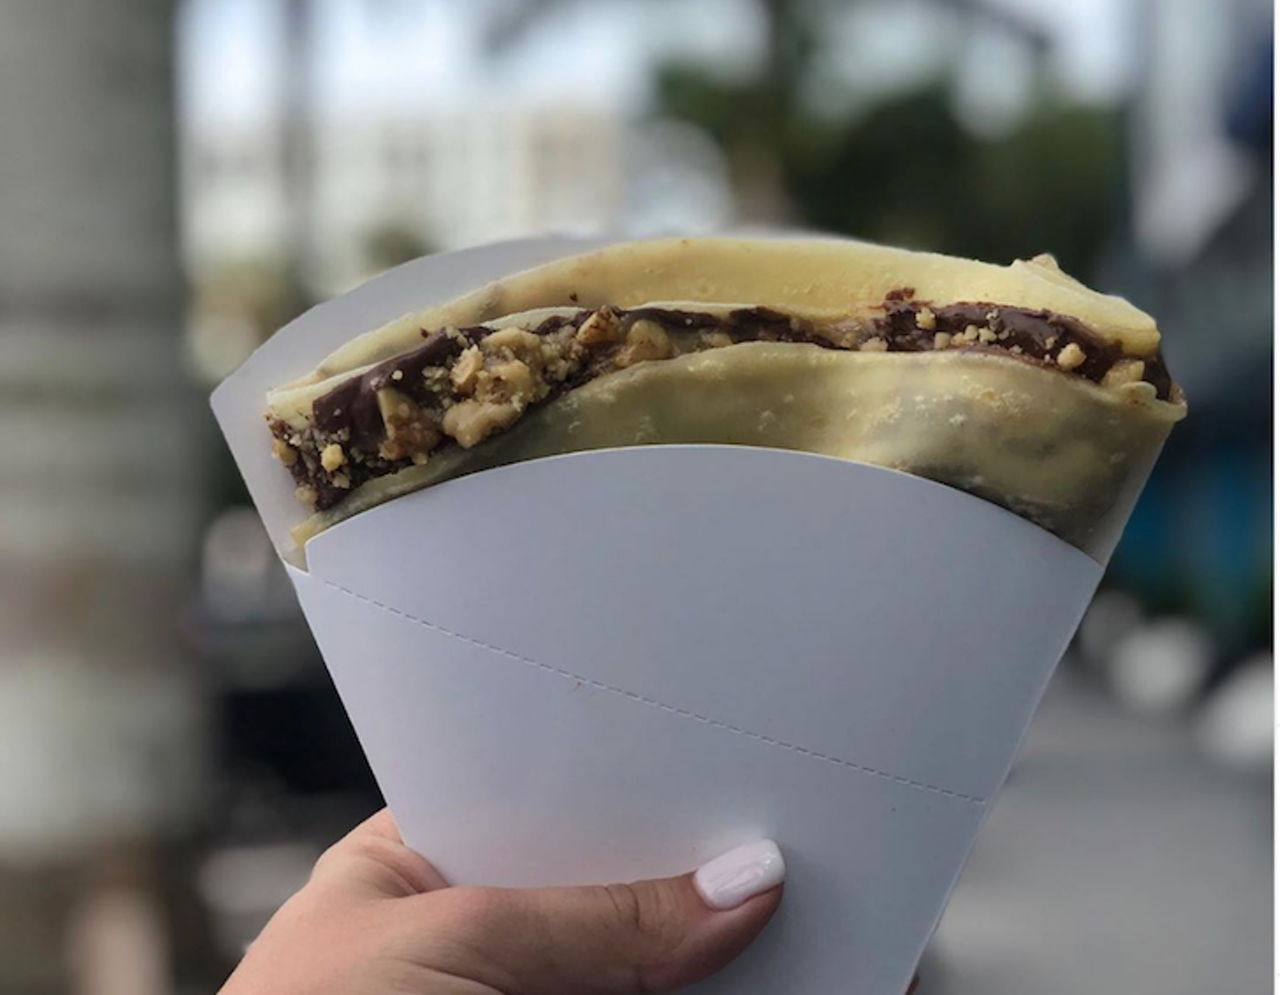 Hometown Crepes  
1113 Central Ave St. St. Pete, phone
OPEN FOR BUSINESS: The made to order sweet and savory crepe offerings will be served the same hours as Baum Ave Market, closed Monday, Tuesday and Wednesday 11 a.m.-7 p.m., Thursday-Saturday 11 a.m.-10 p.m. and 11 a.m.-7 p.m. on Sunday. One signature offering is the Nut'n But Love with a Nutella base, stuffed with crushed up nuts and drizzled with caramel.
Photo via hometown_crepes/Instagram